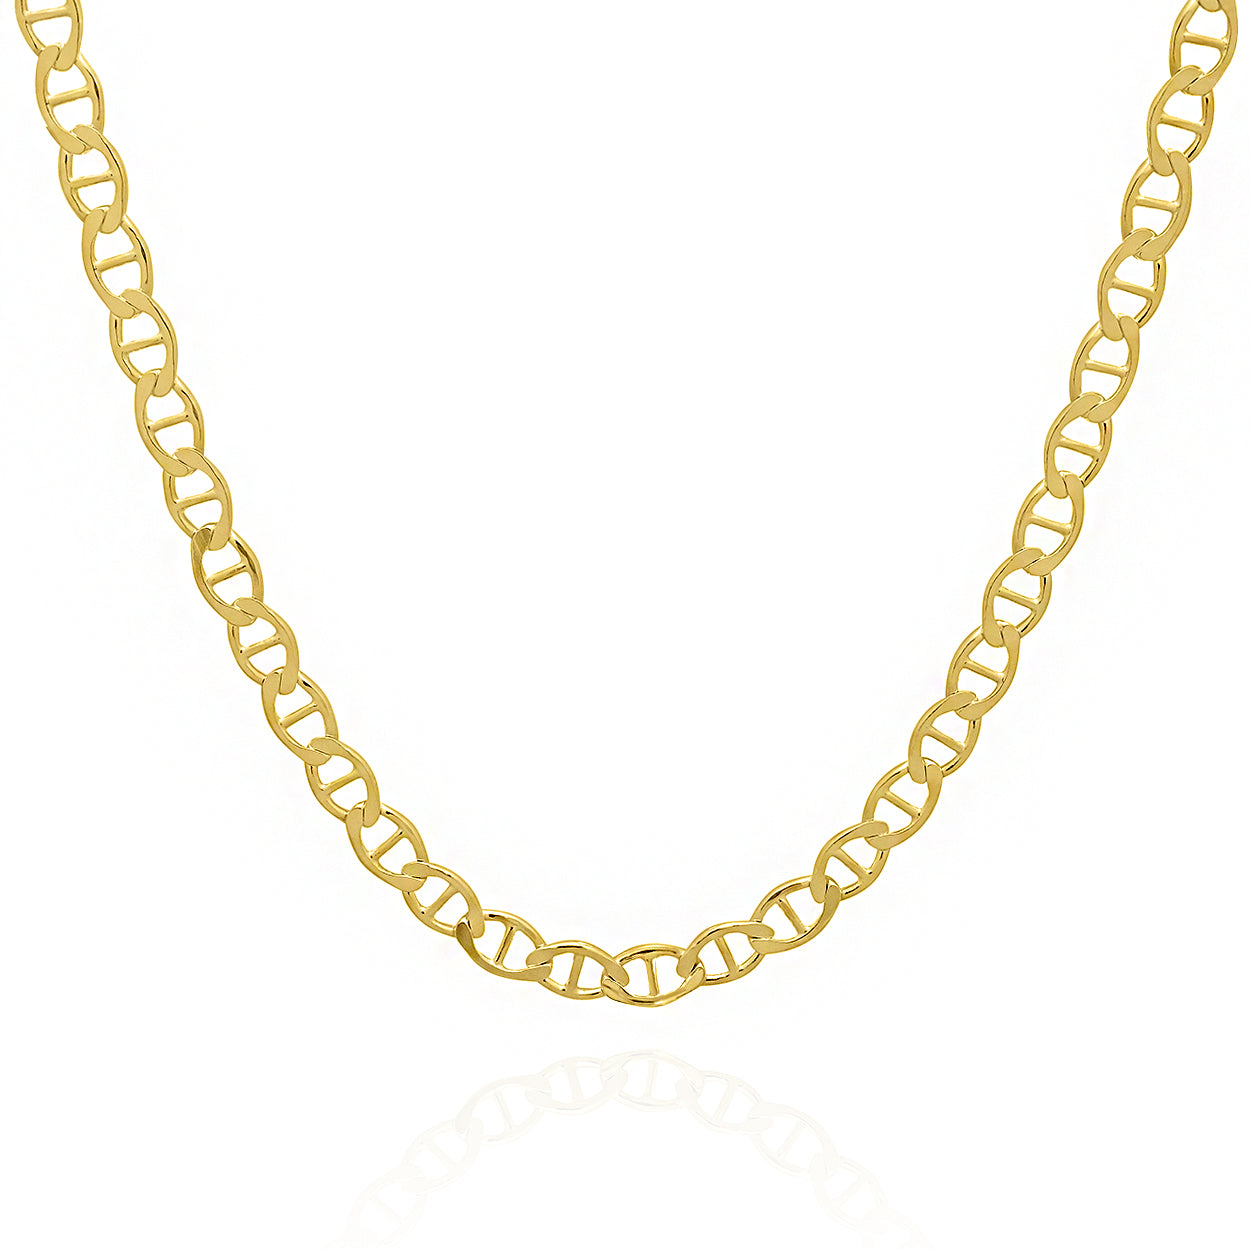 4.5mm Wide Marine Style Chain Solid Gold Yellow